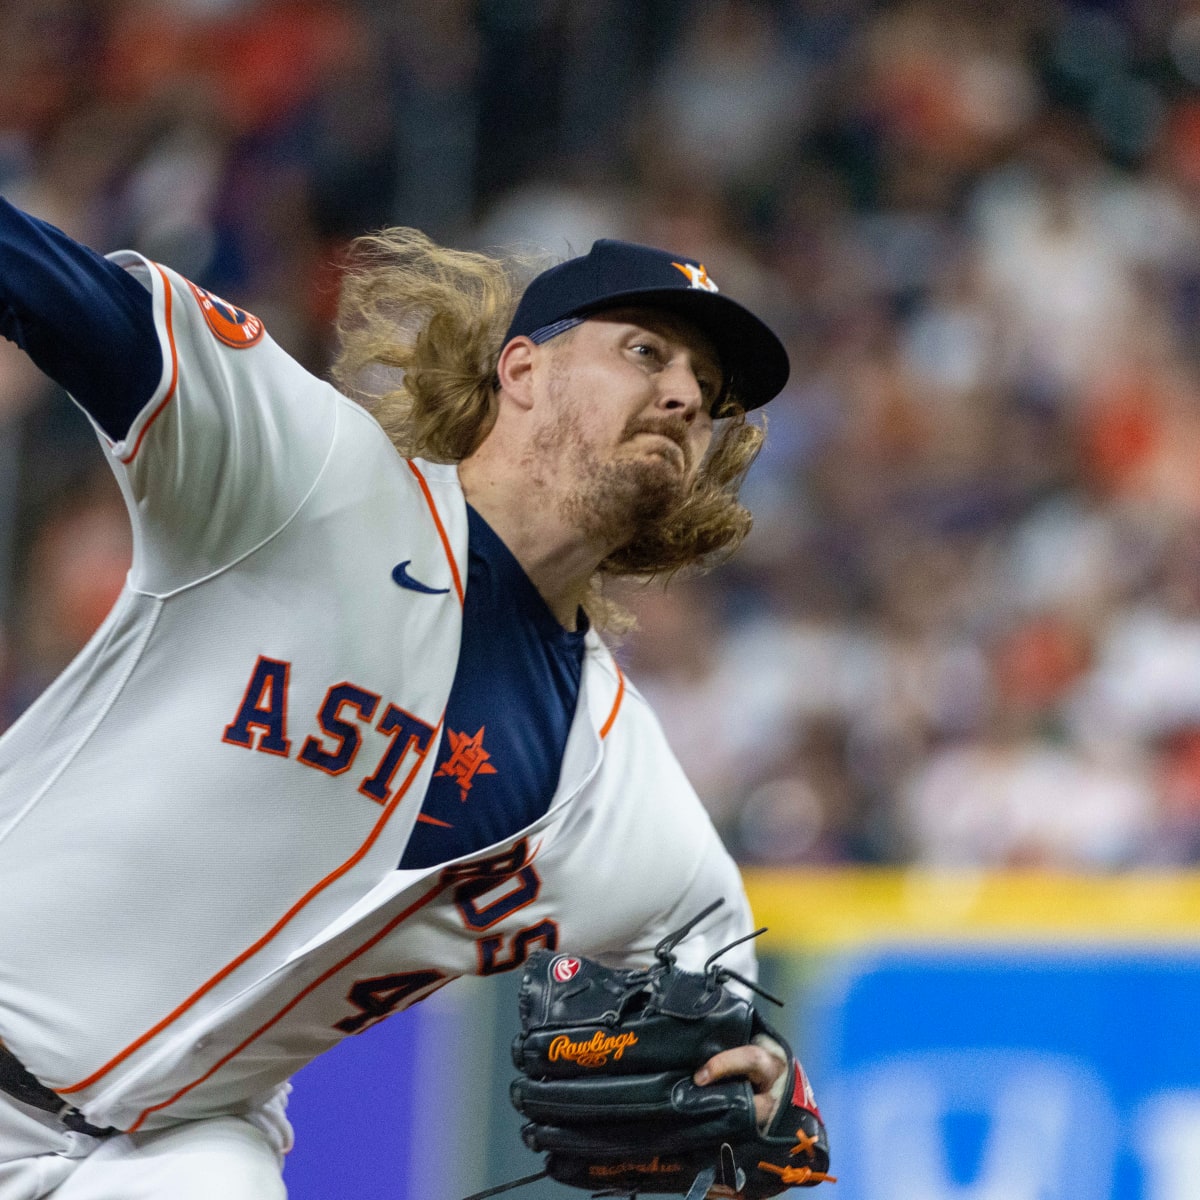 Houston Astros Reliever Ryne Stanek Throws Bullpen in Progress From Injured  Ankle - Sports Illustrated Inside The Astros